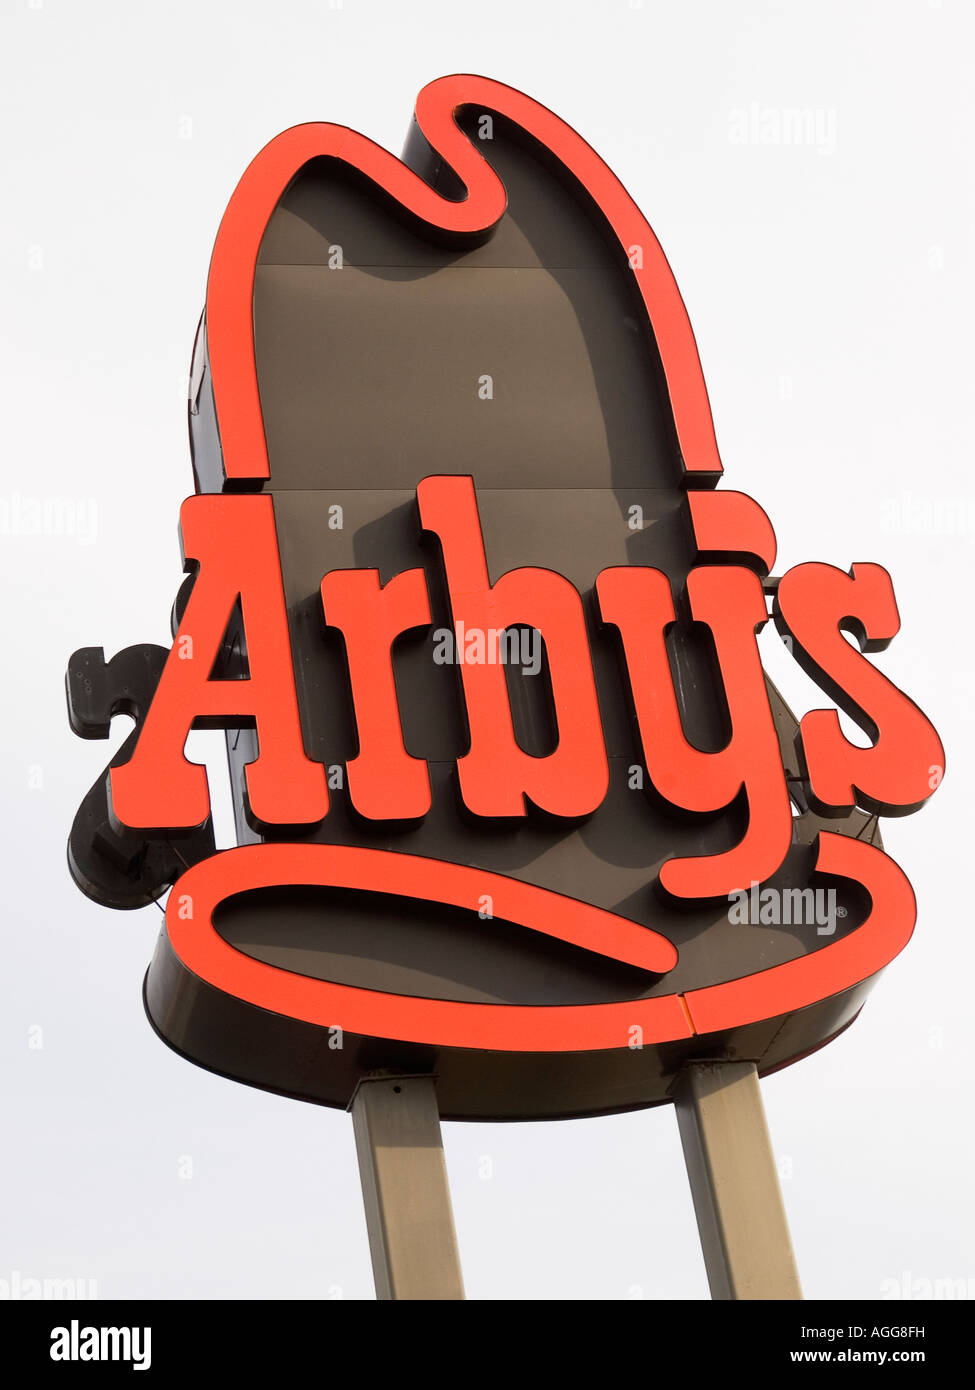 Arby's Restaurant Sign Stock Photo